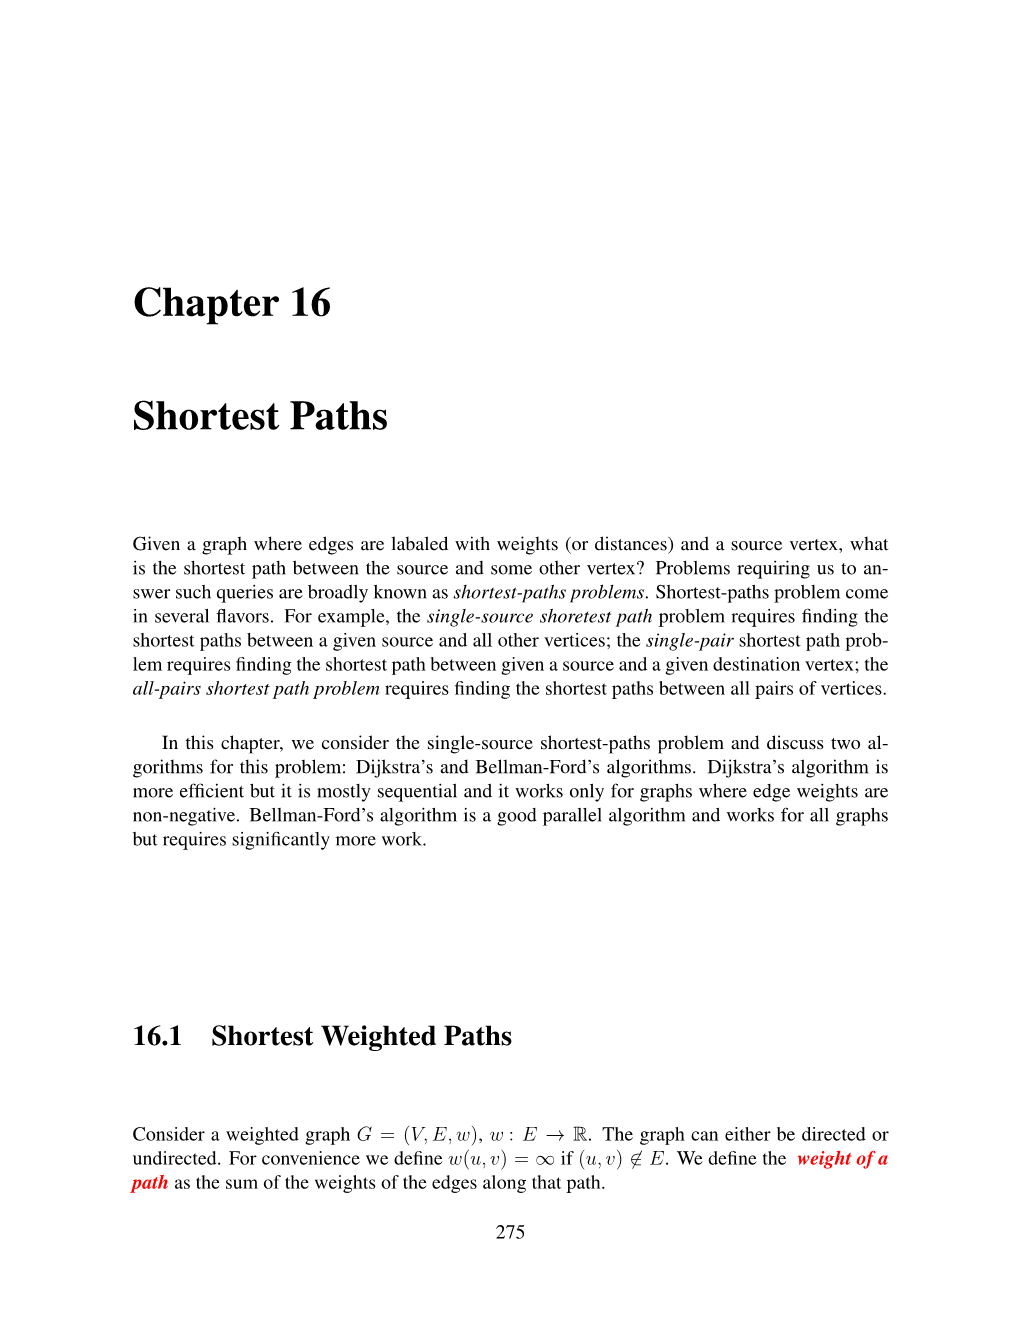 Chapter 16 Shortest Paths